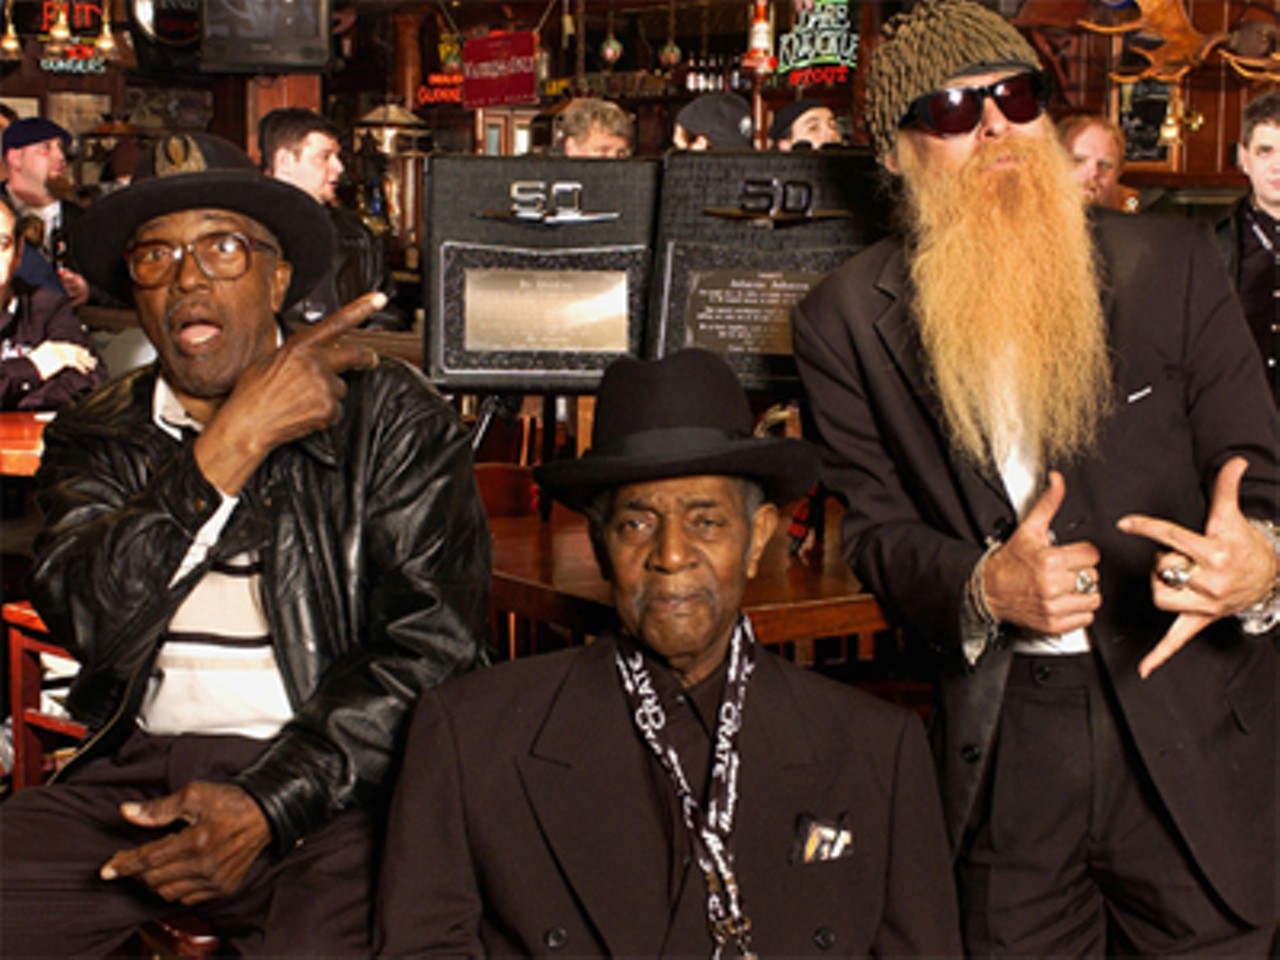 Bo Diddley, Johnnie Johnson and Billy Gibbons at the Crate awards.